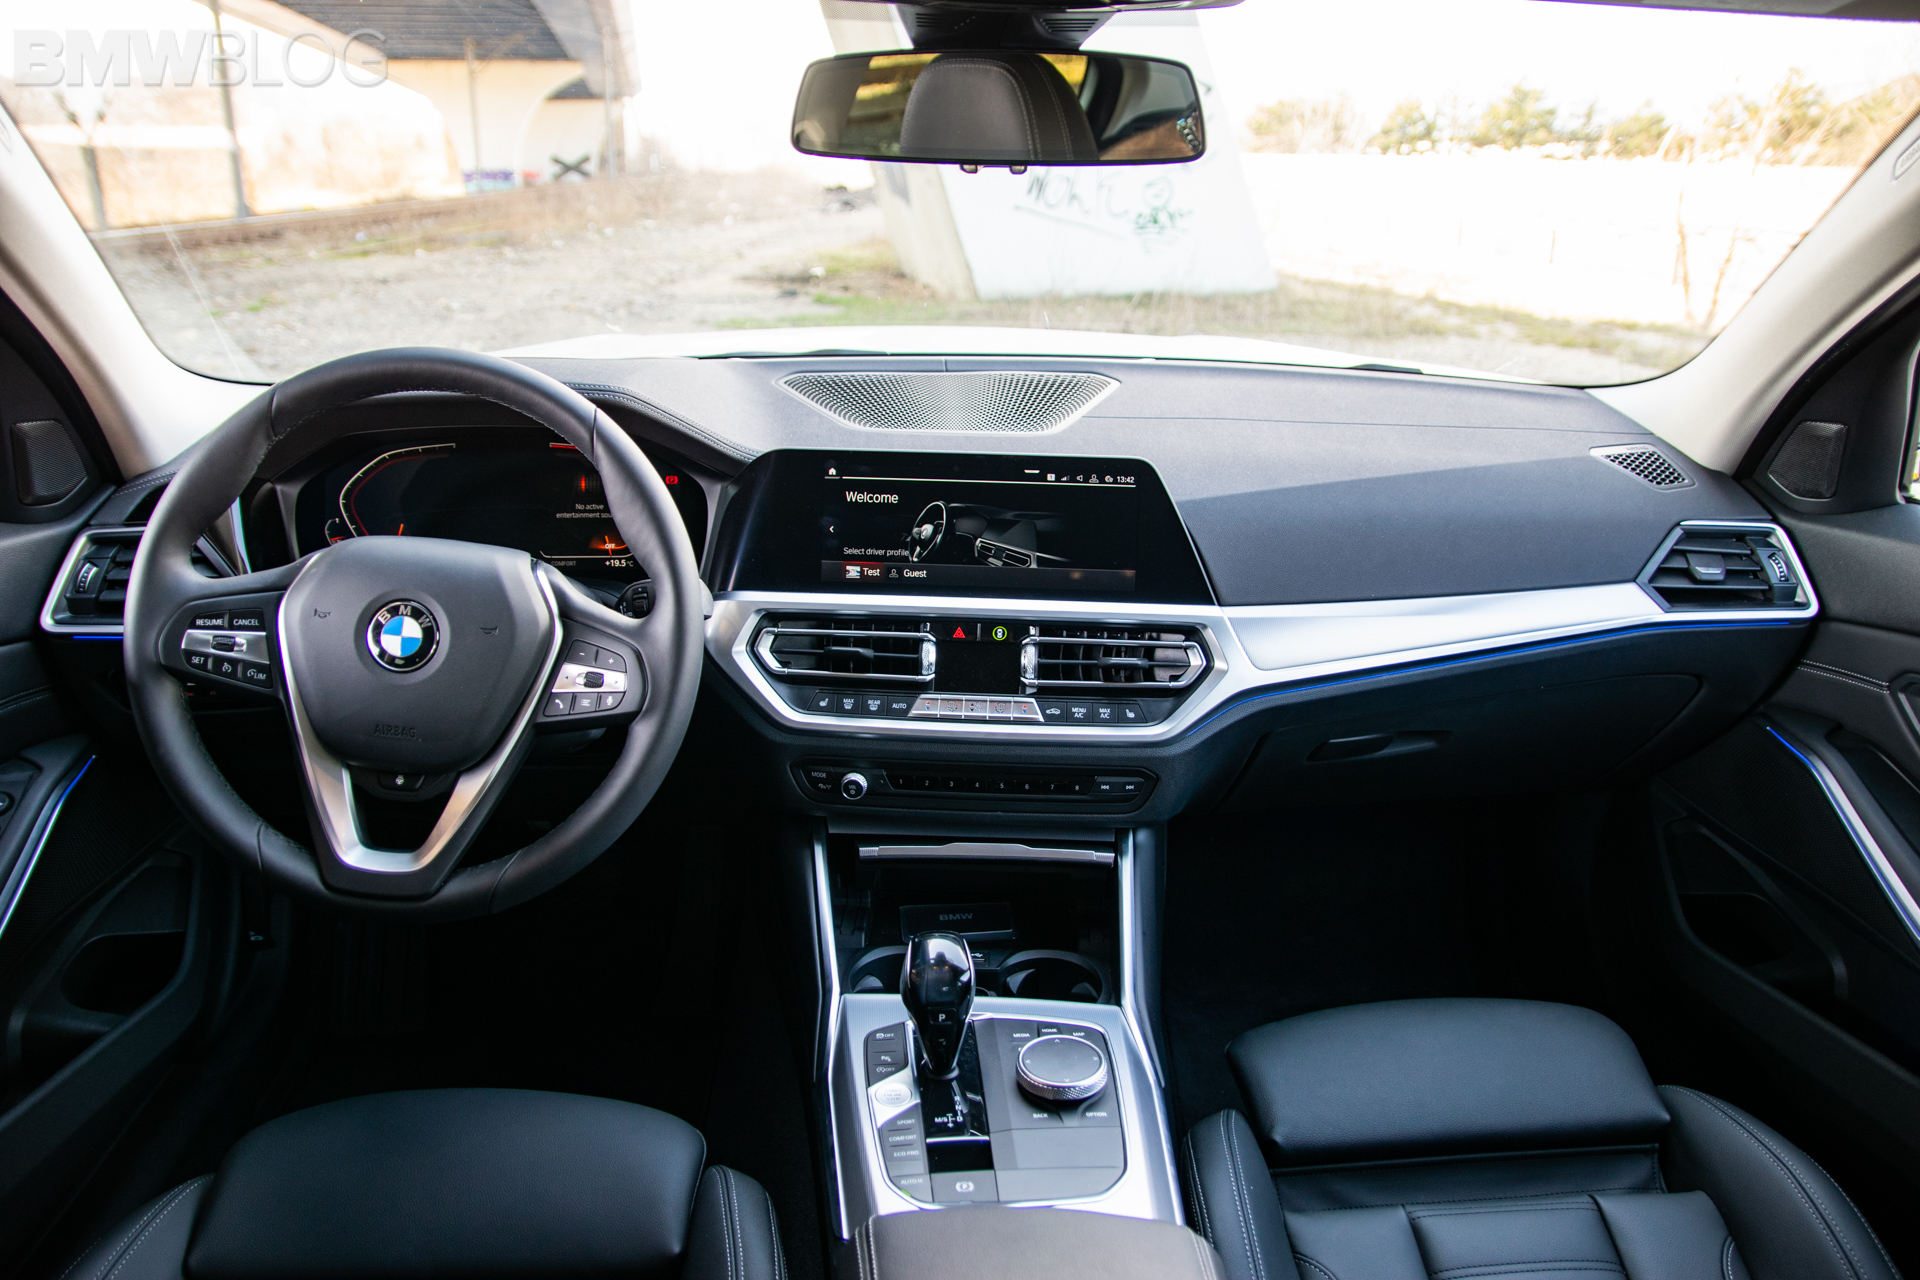 Sightseeing Frugal Punctuation TEST DRIVE: 2019 BMW G20 320d – Still a Best-Seller?